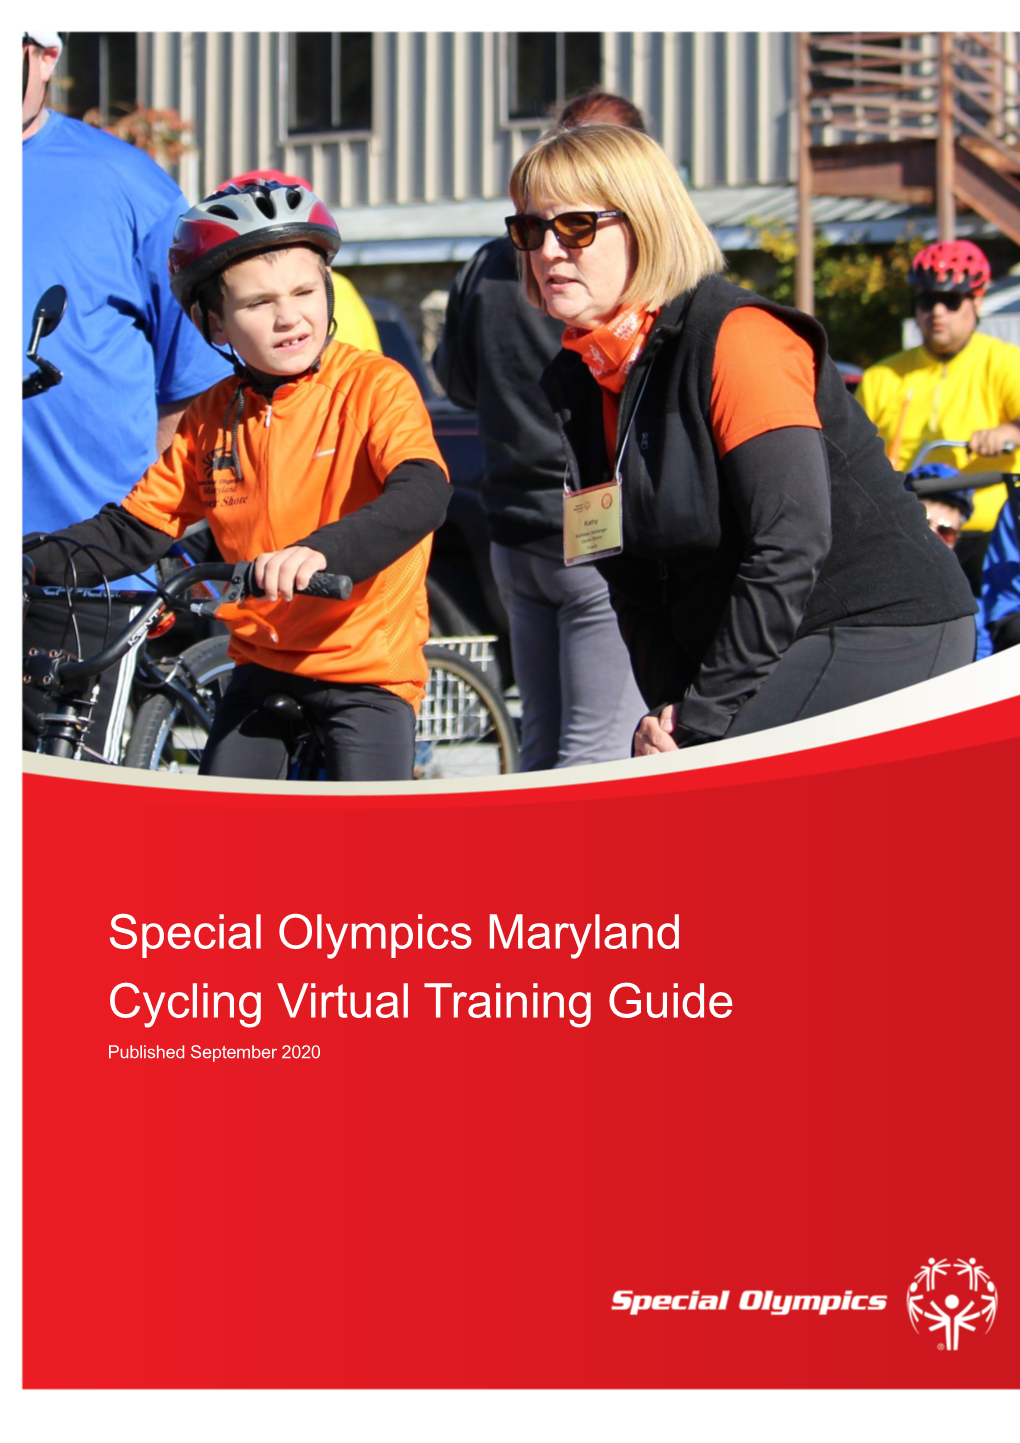 Cycling Virtual Training Guide Published September 2020